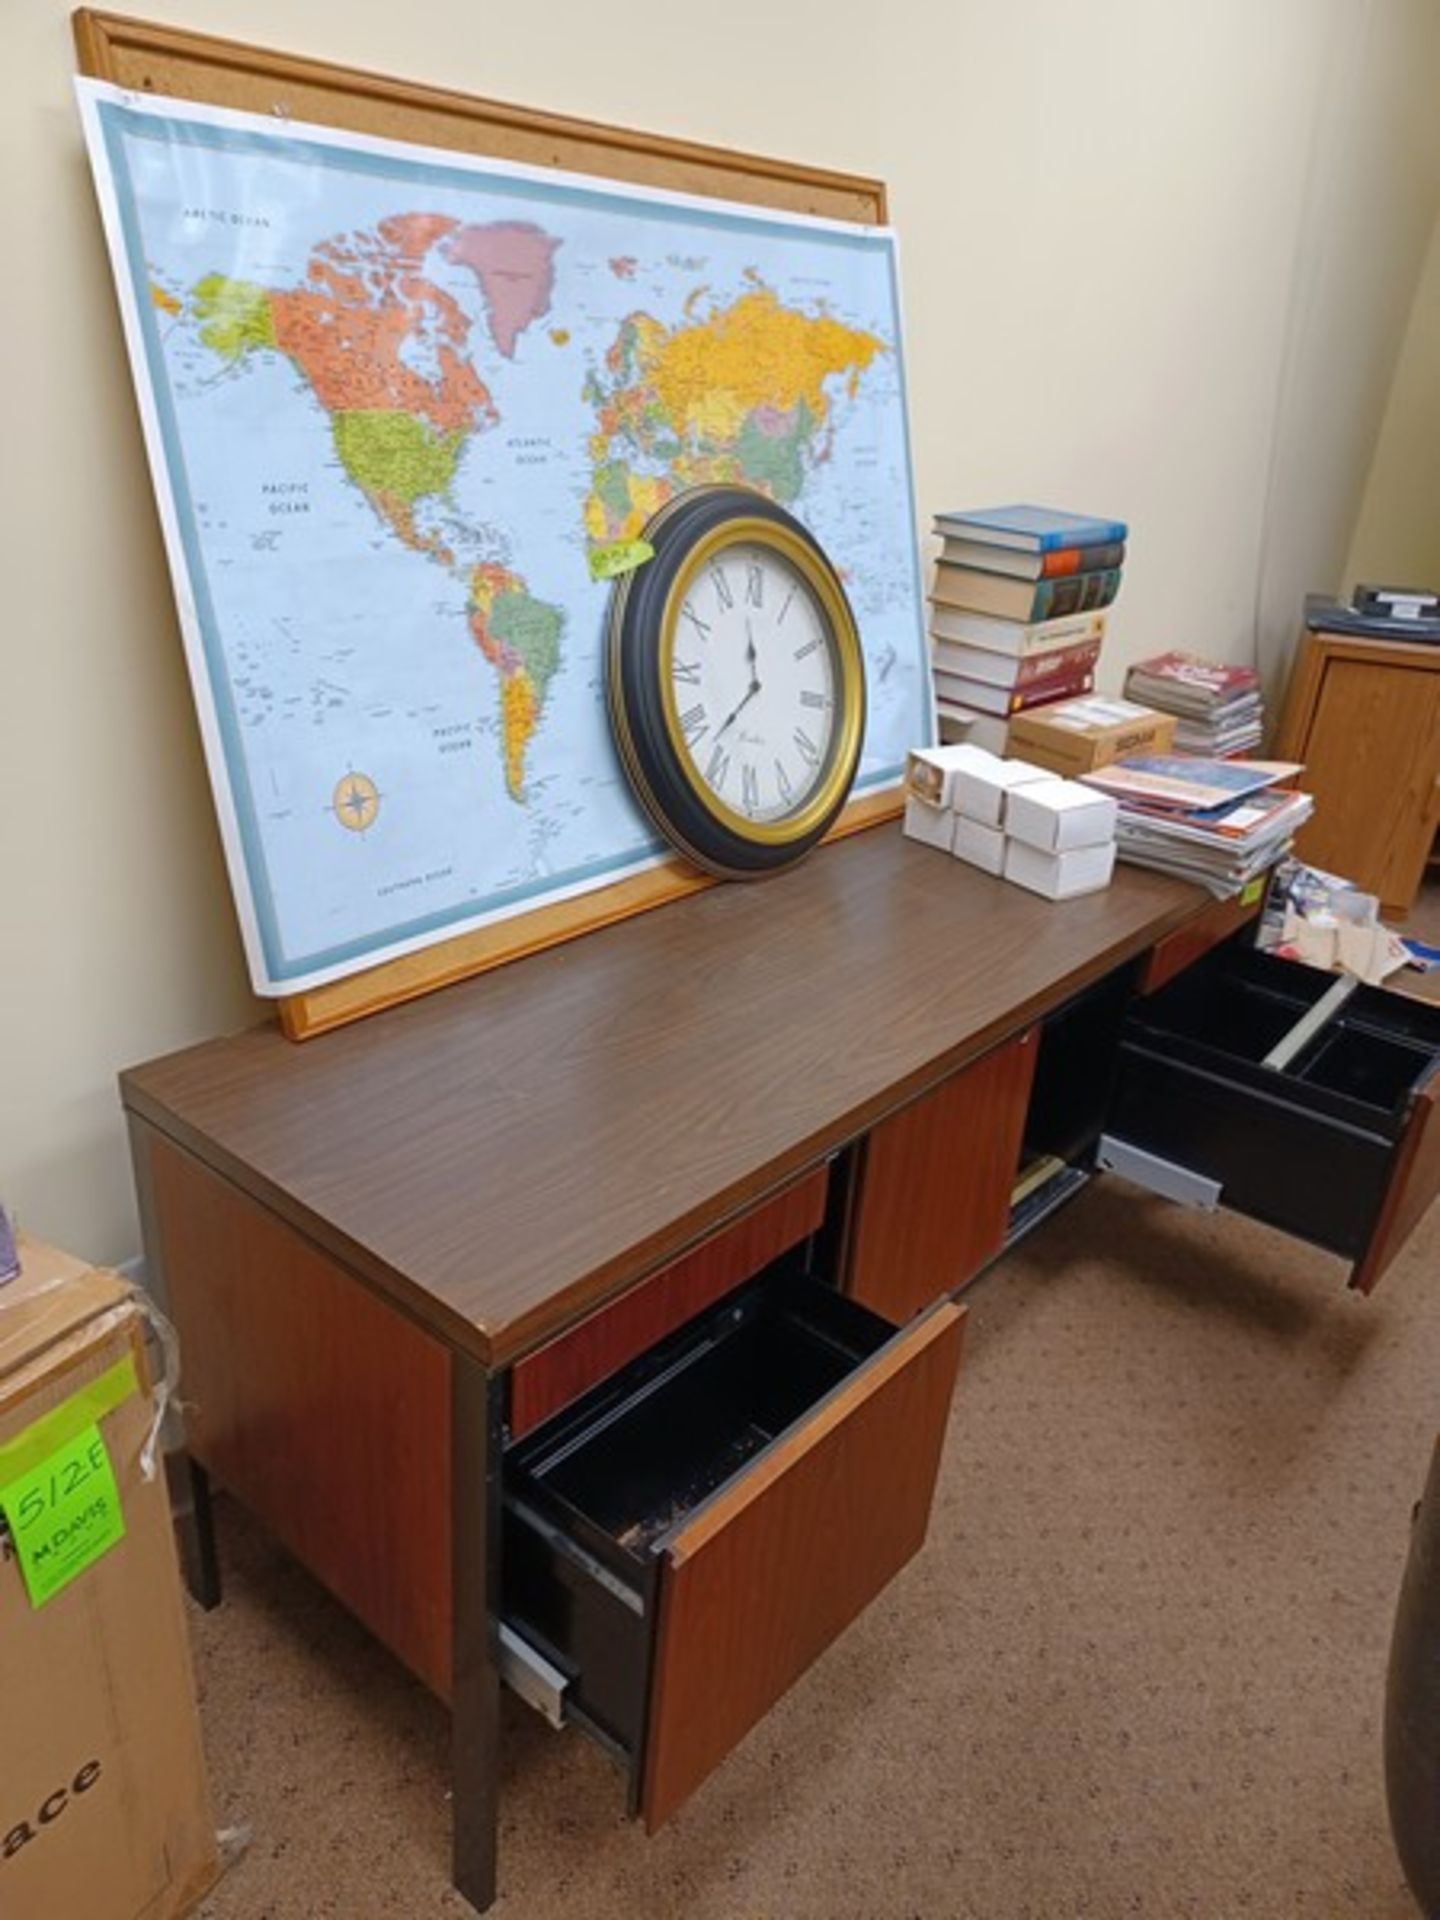 6 unit miscellaneous office furniture/items: 1 credenza 67"W x 21.5"Dx28.5"H / 1 TV stand 60"Wx20. - Image 3 of 5